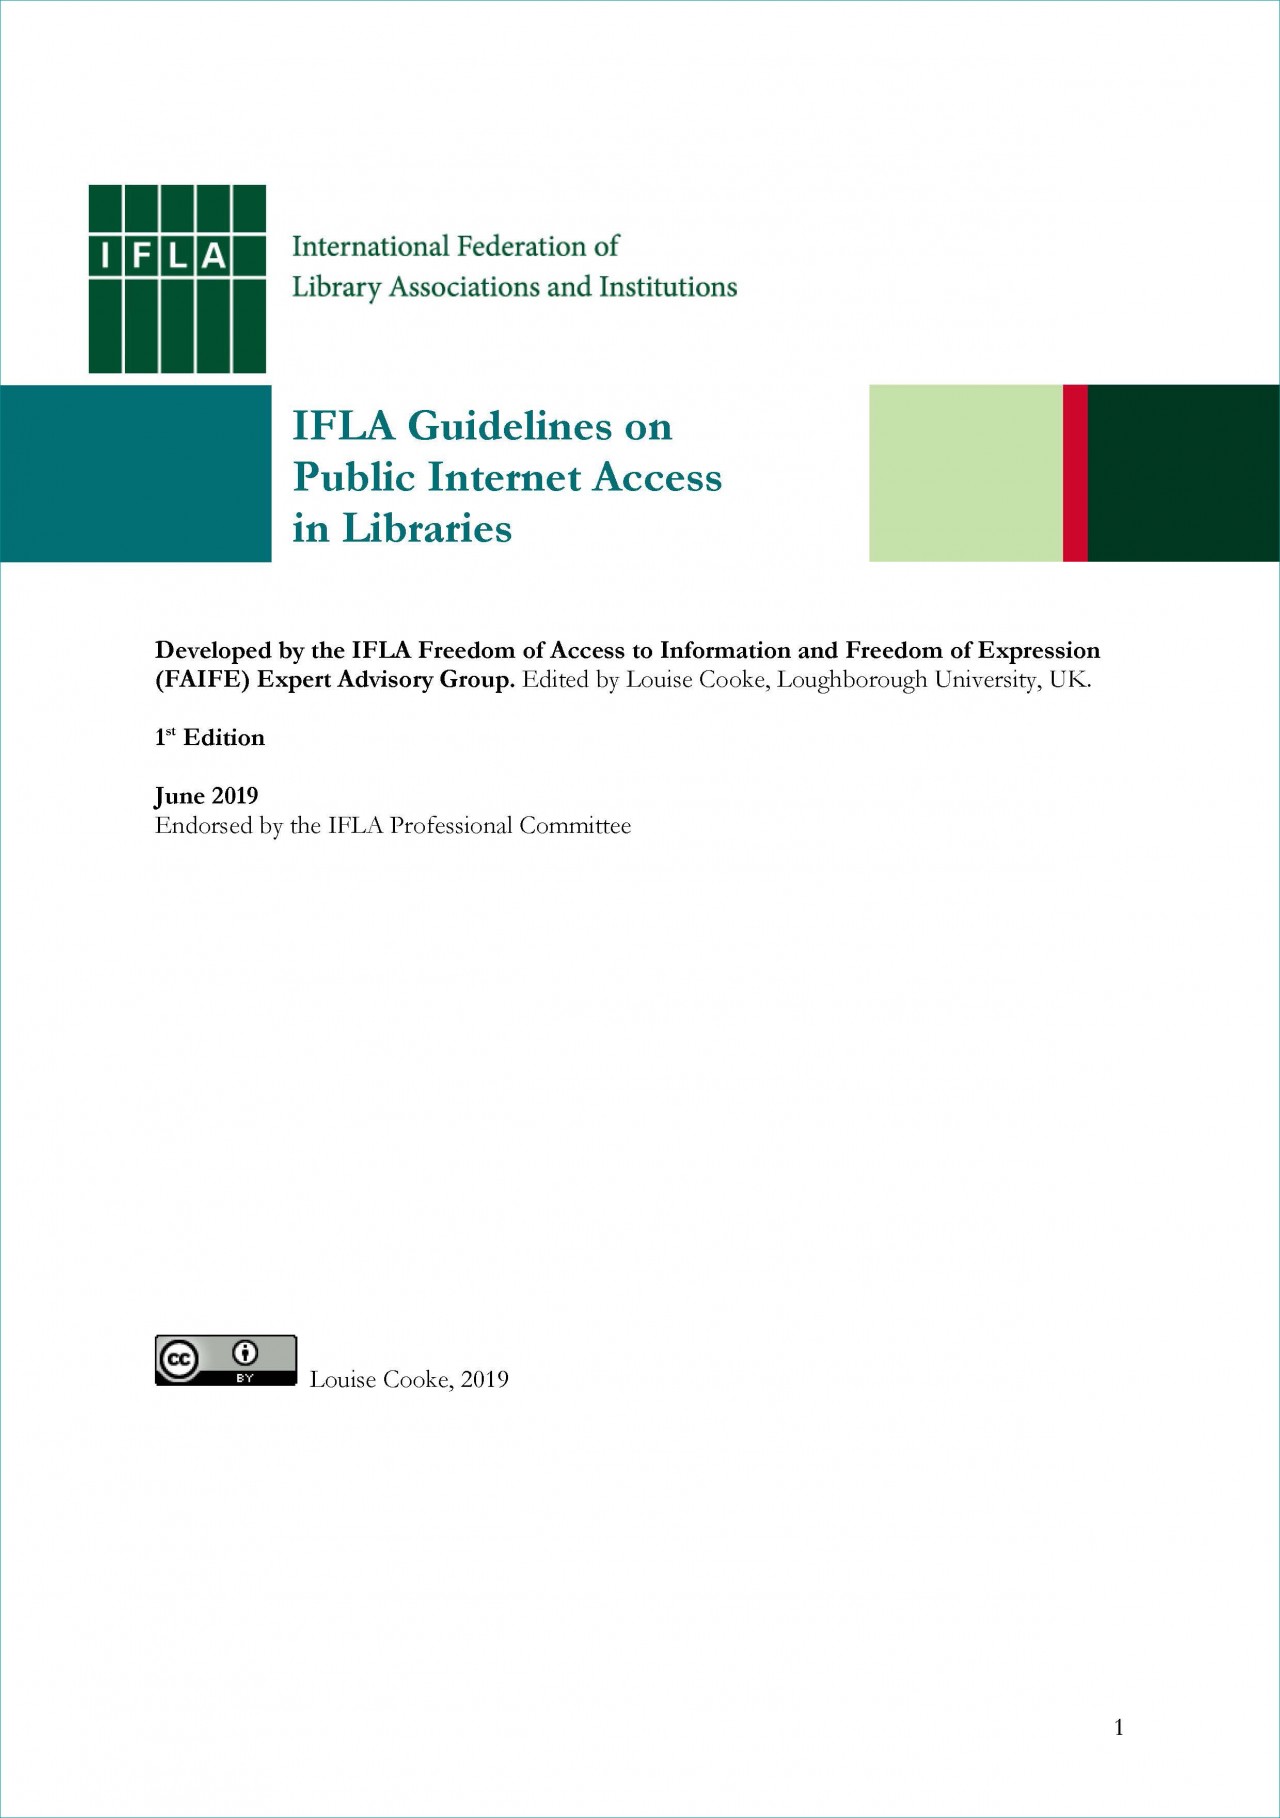 Guidelines on Public Internet Access in Libraries